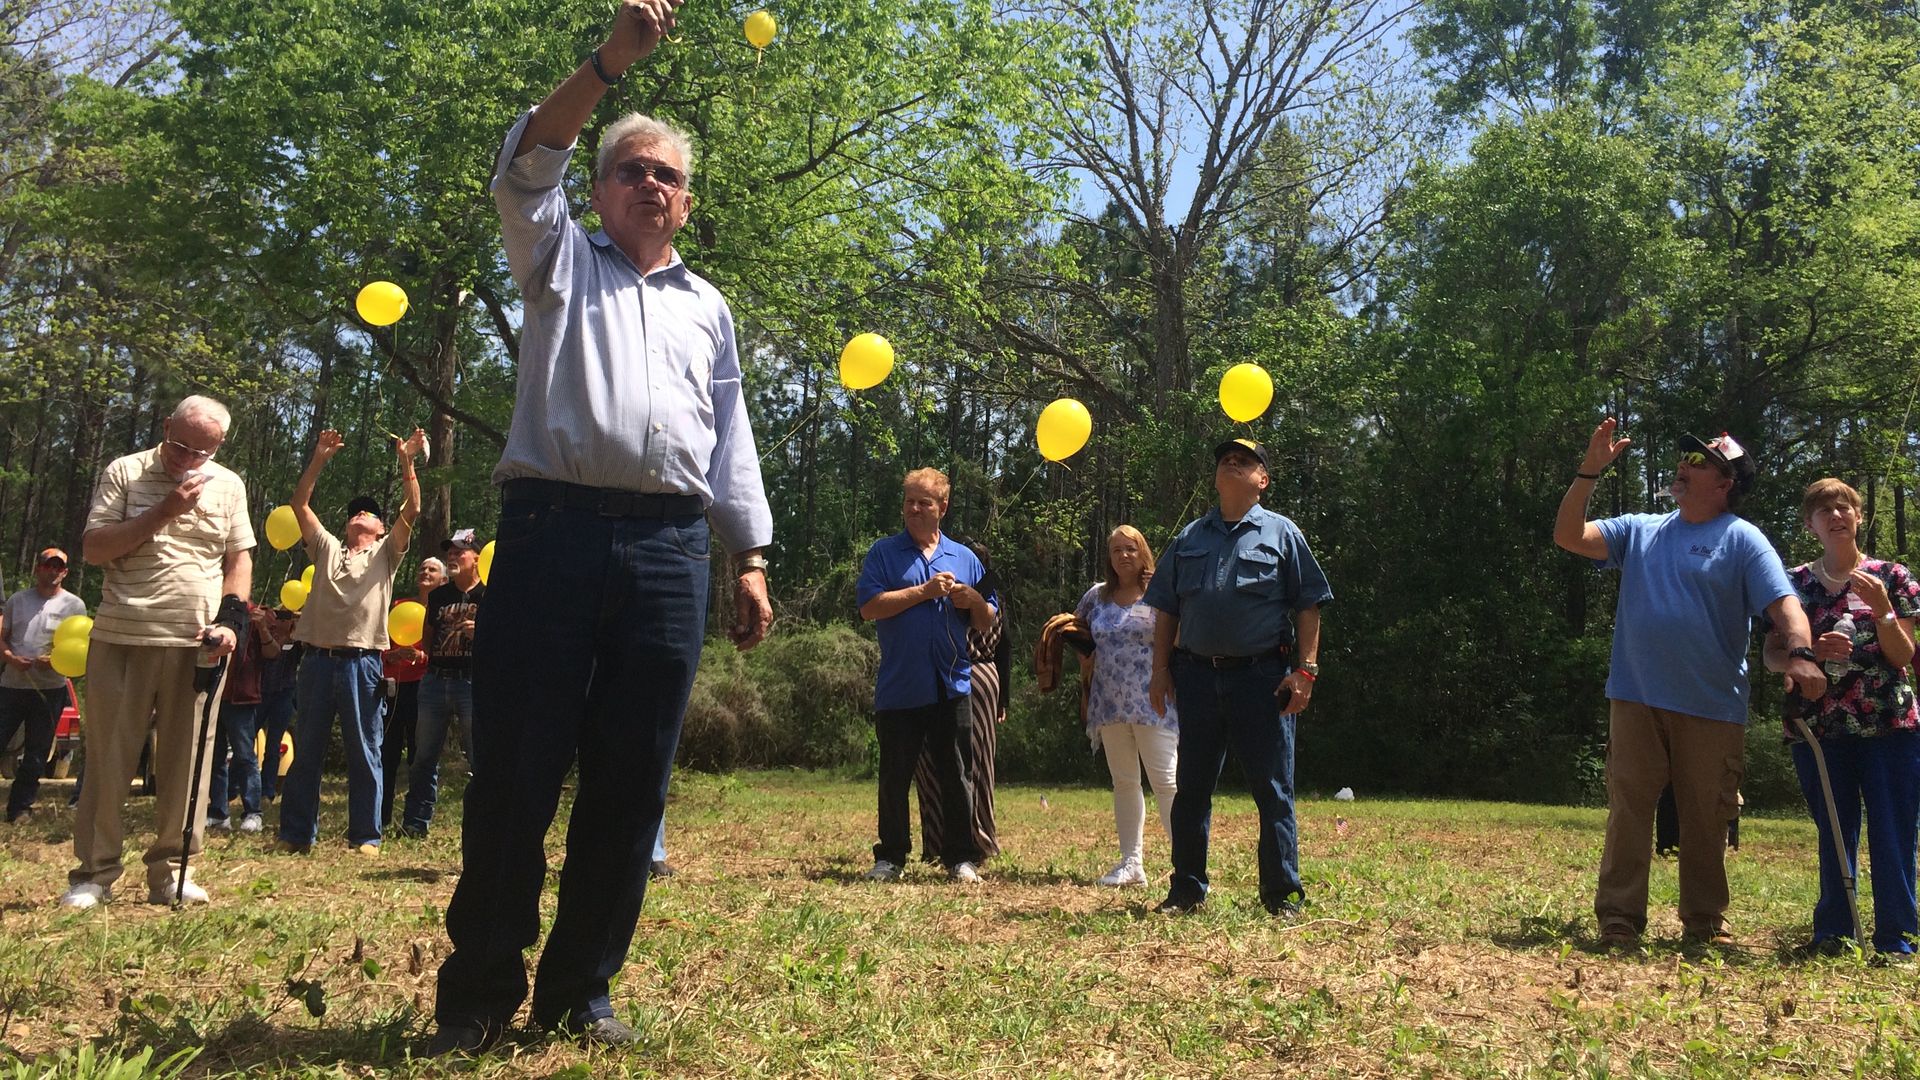 Former wards of the state who call themselves the White House Boys release yellow balloons in memory of boys who died at the state-run reform school.